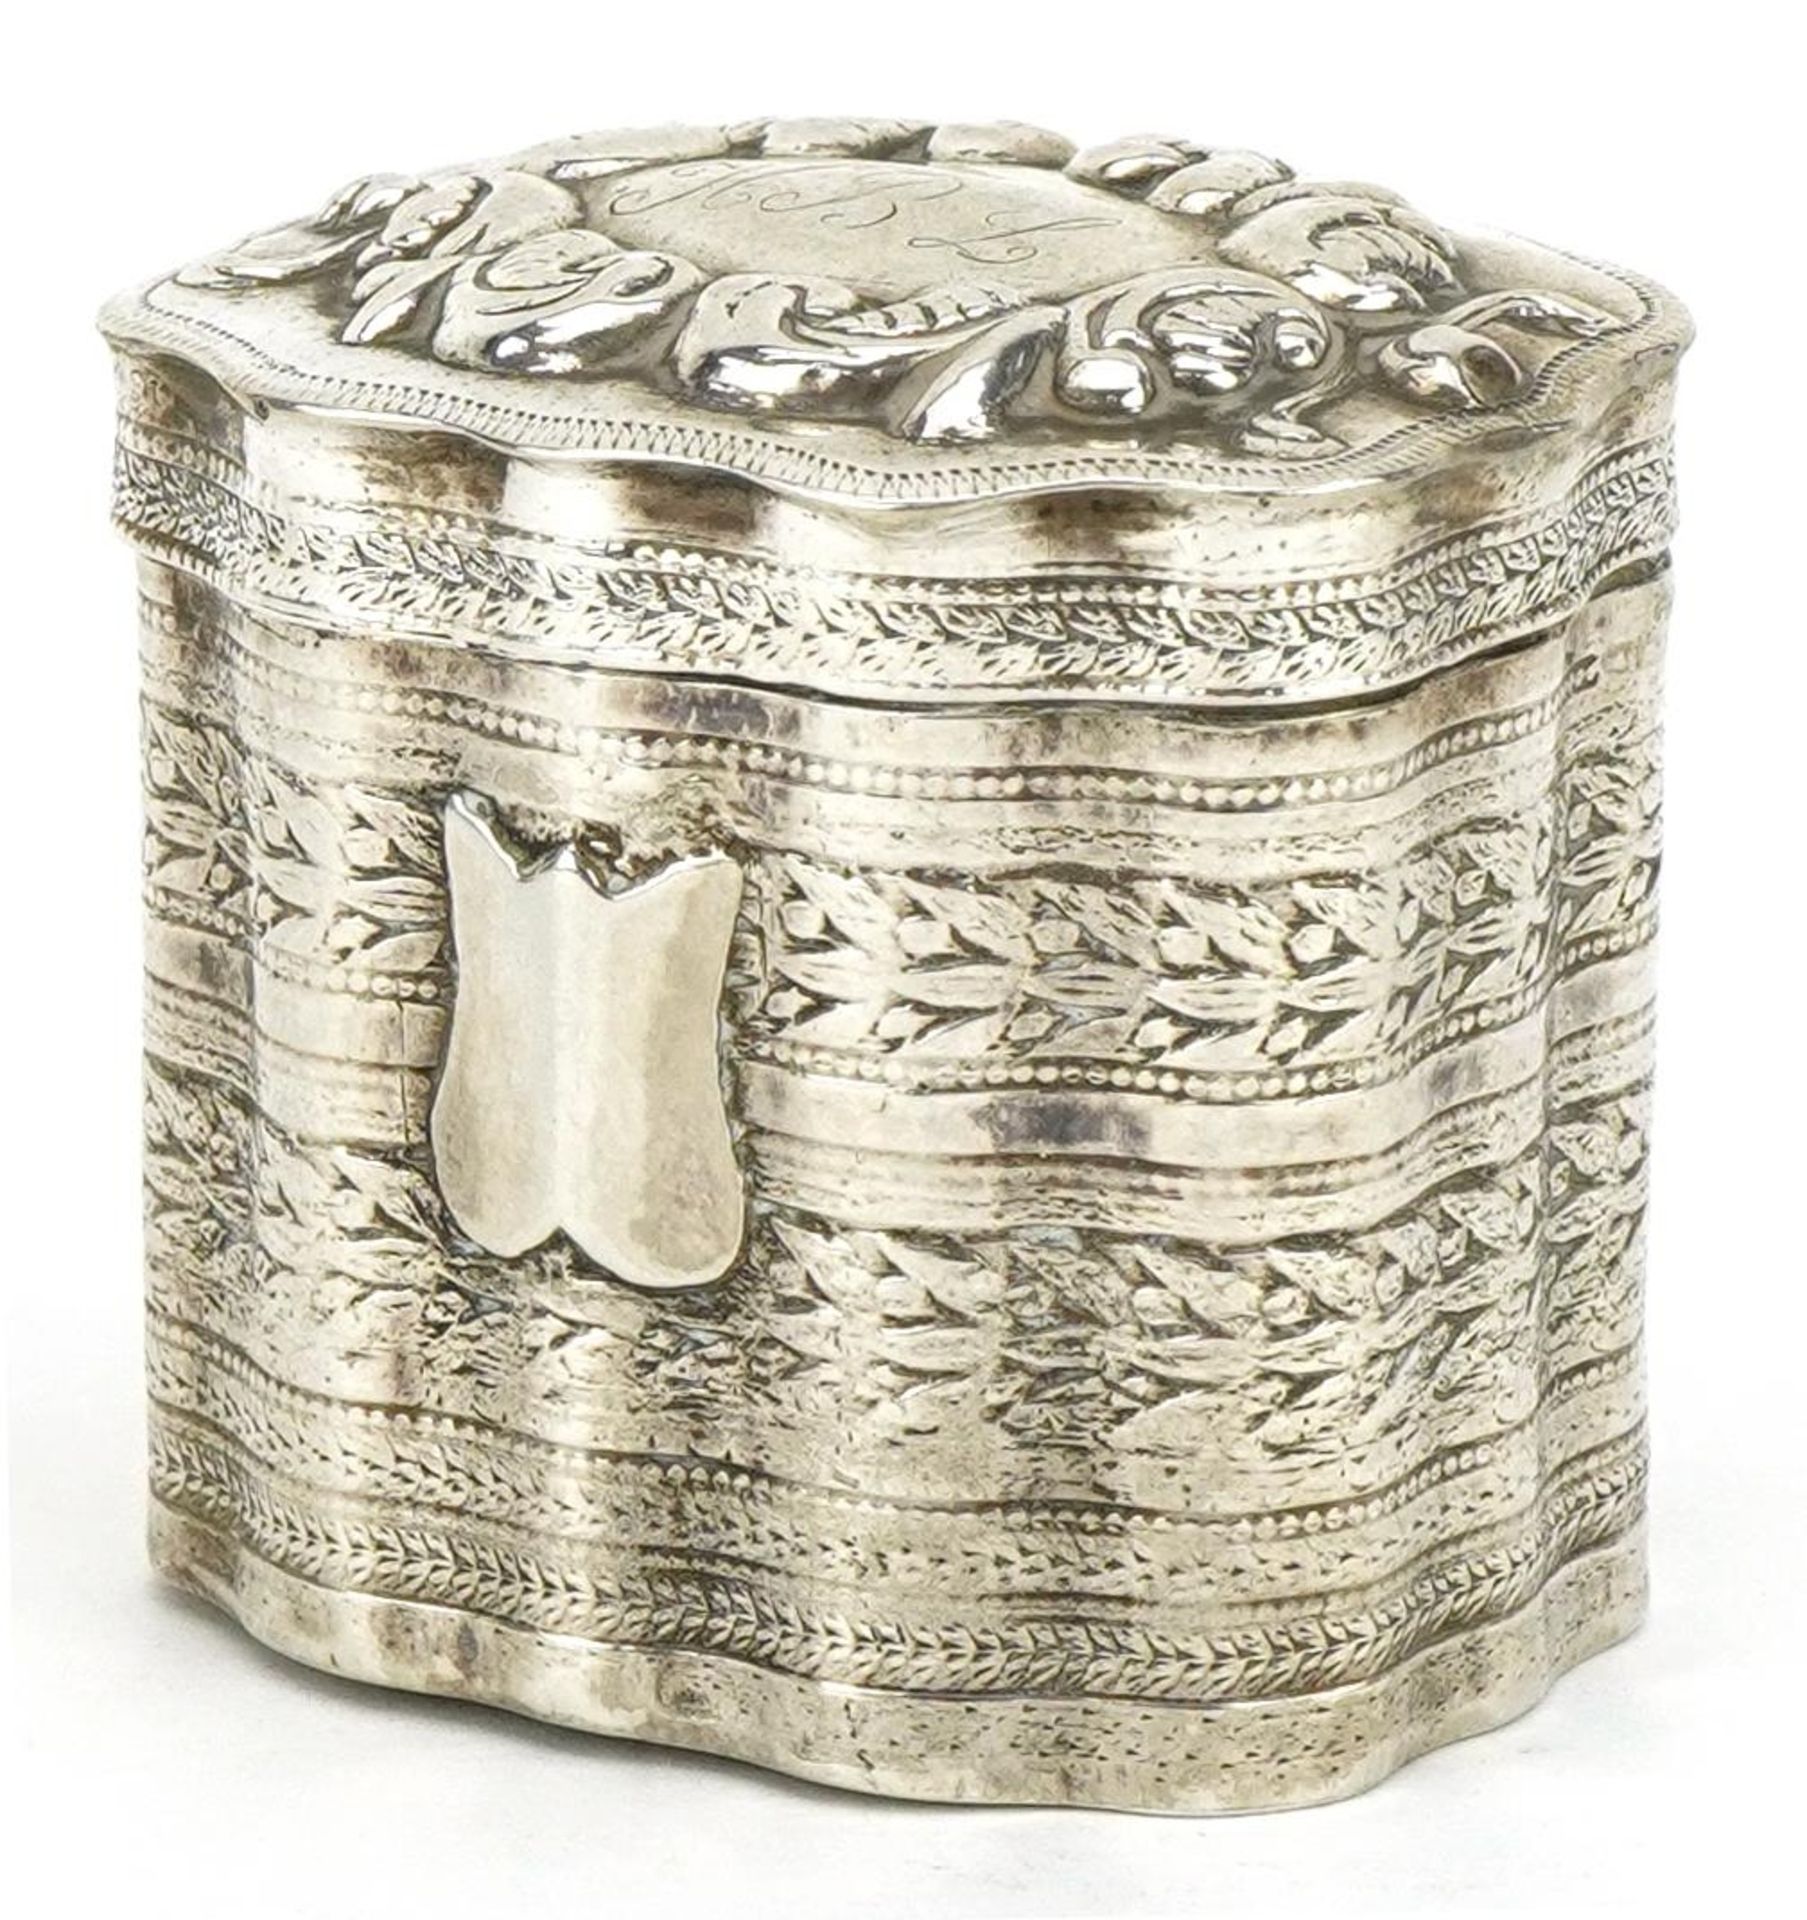 Antique Dutch silver trinket with hinged lid embossed and engraved with flowers, indistinct